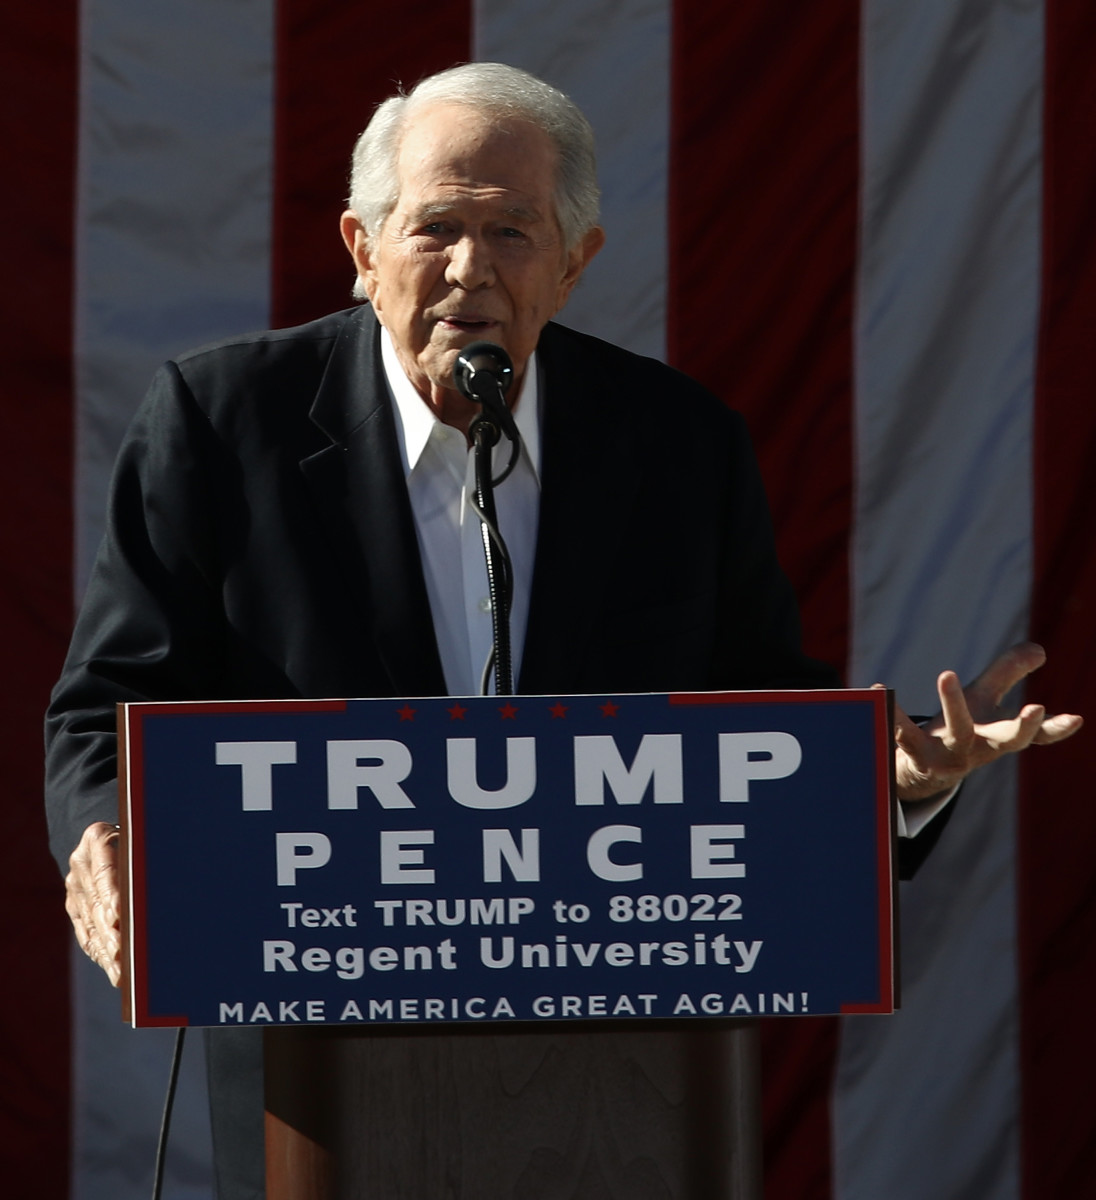 Televangelist Pat Robertson delivers remarks at a campaign event for Republican presidential candidate Donald Trump at Regent University.